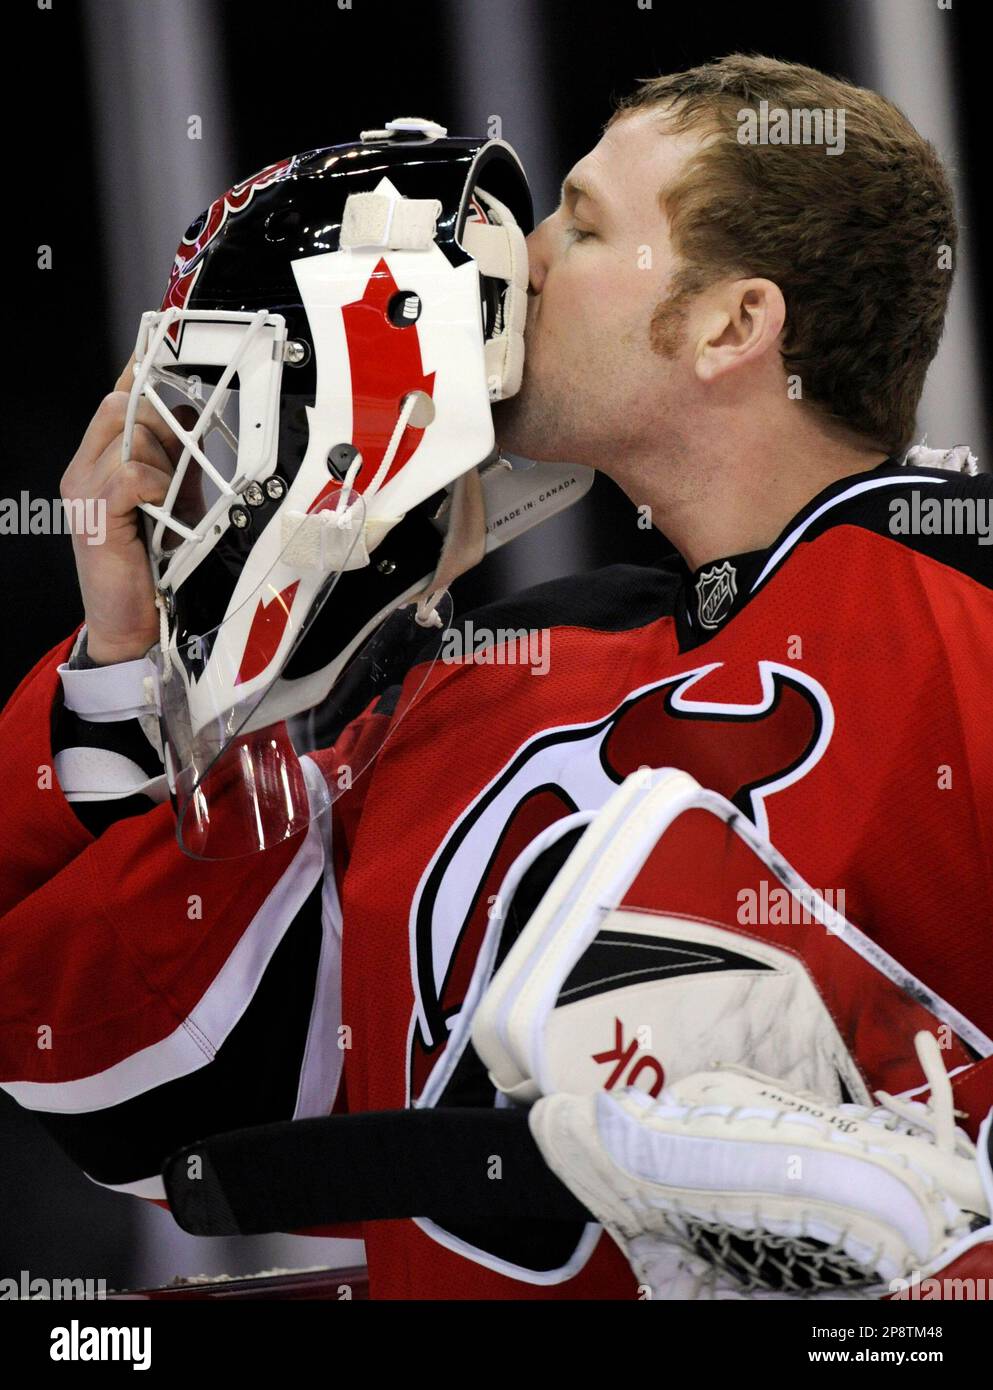 Martin Brodeur is returning to the New Jersey Devils in a brand